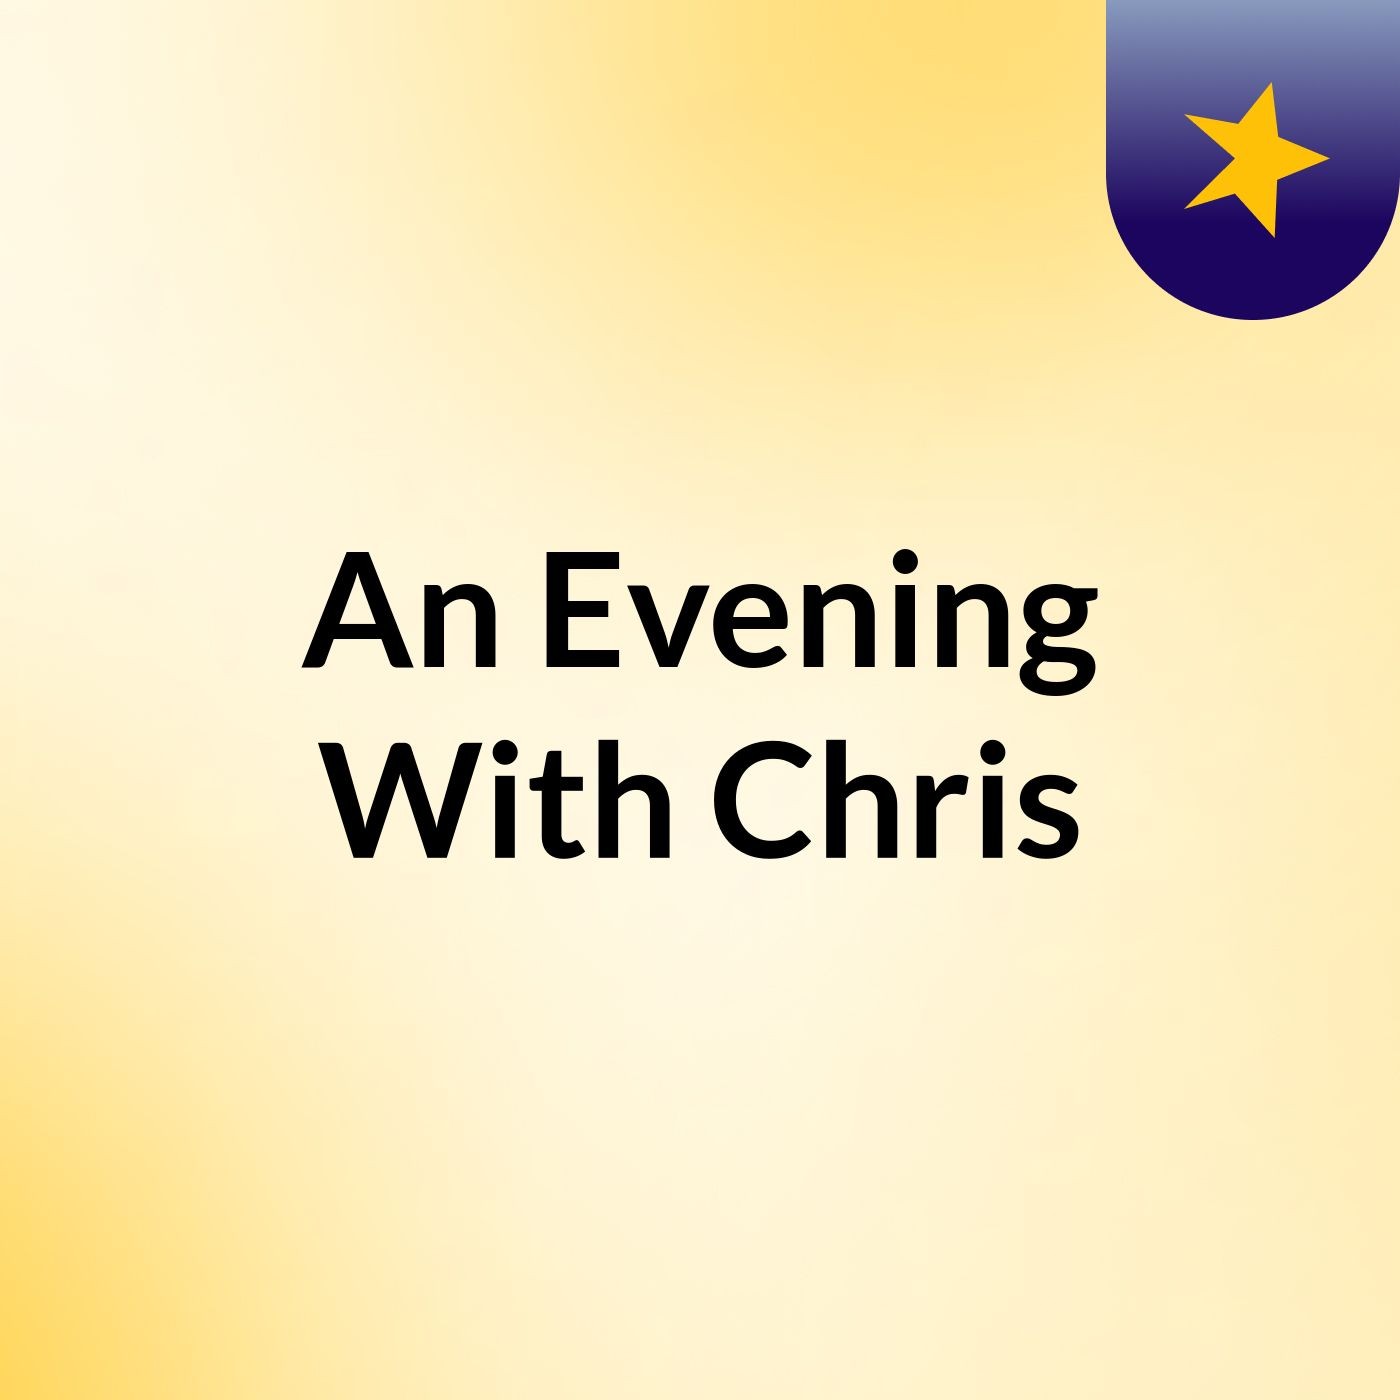 Episode 2 - An Evening With Chris